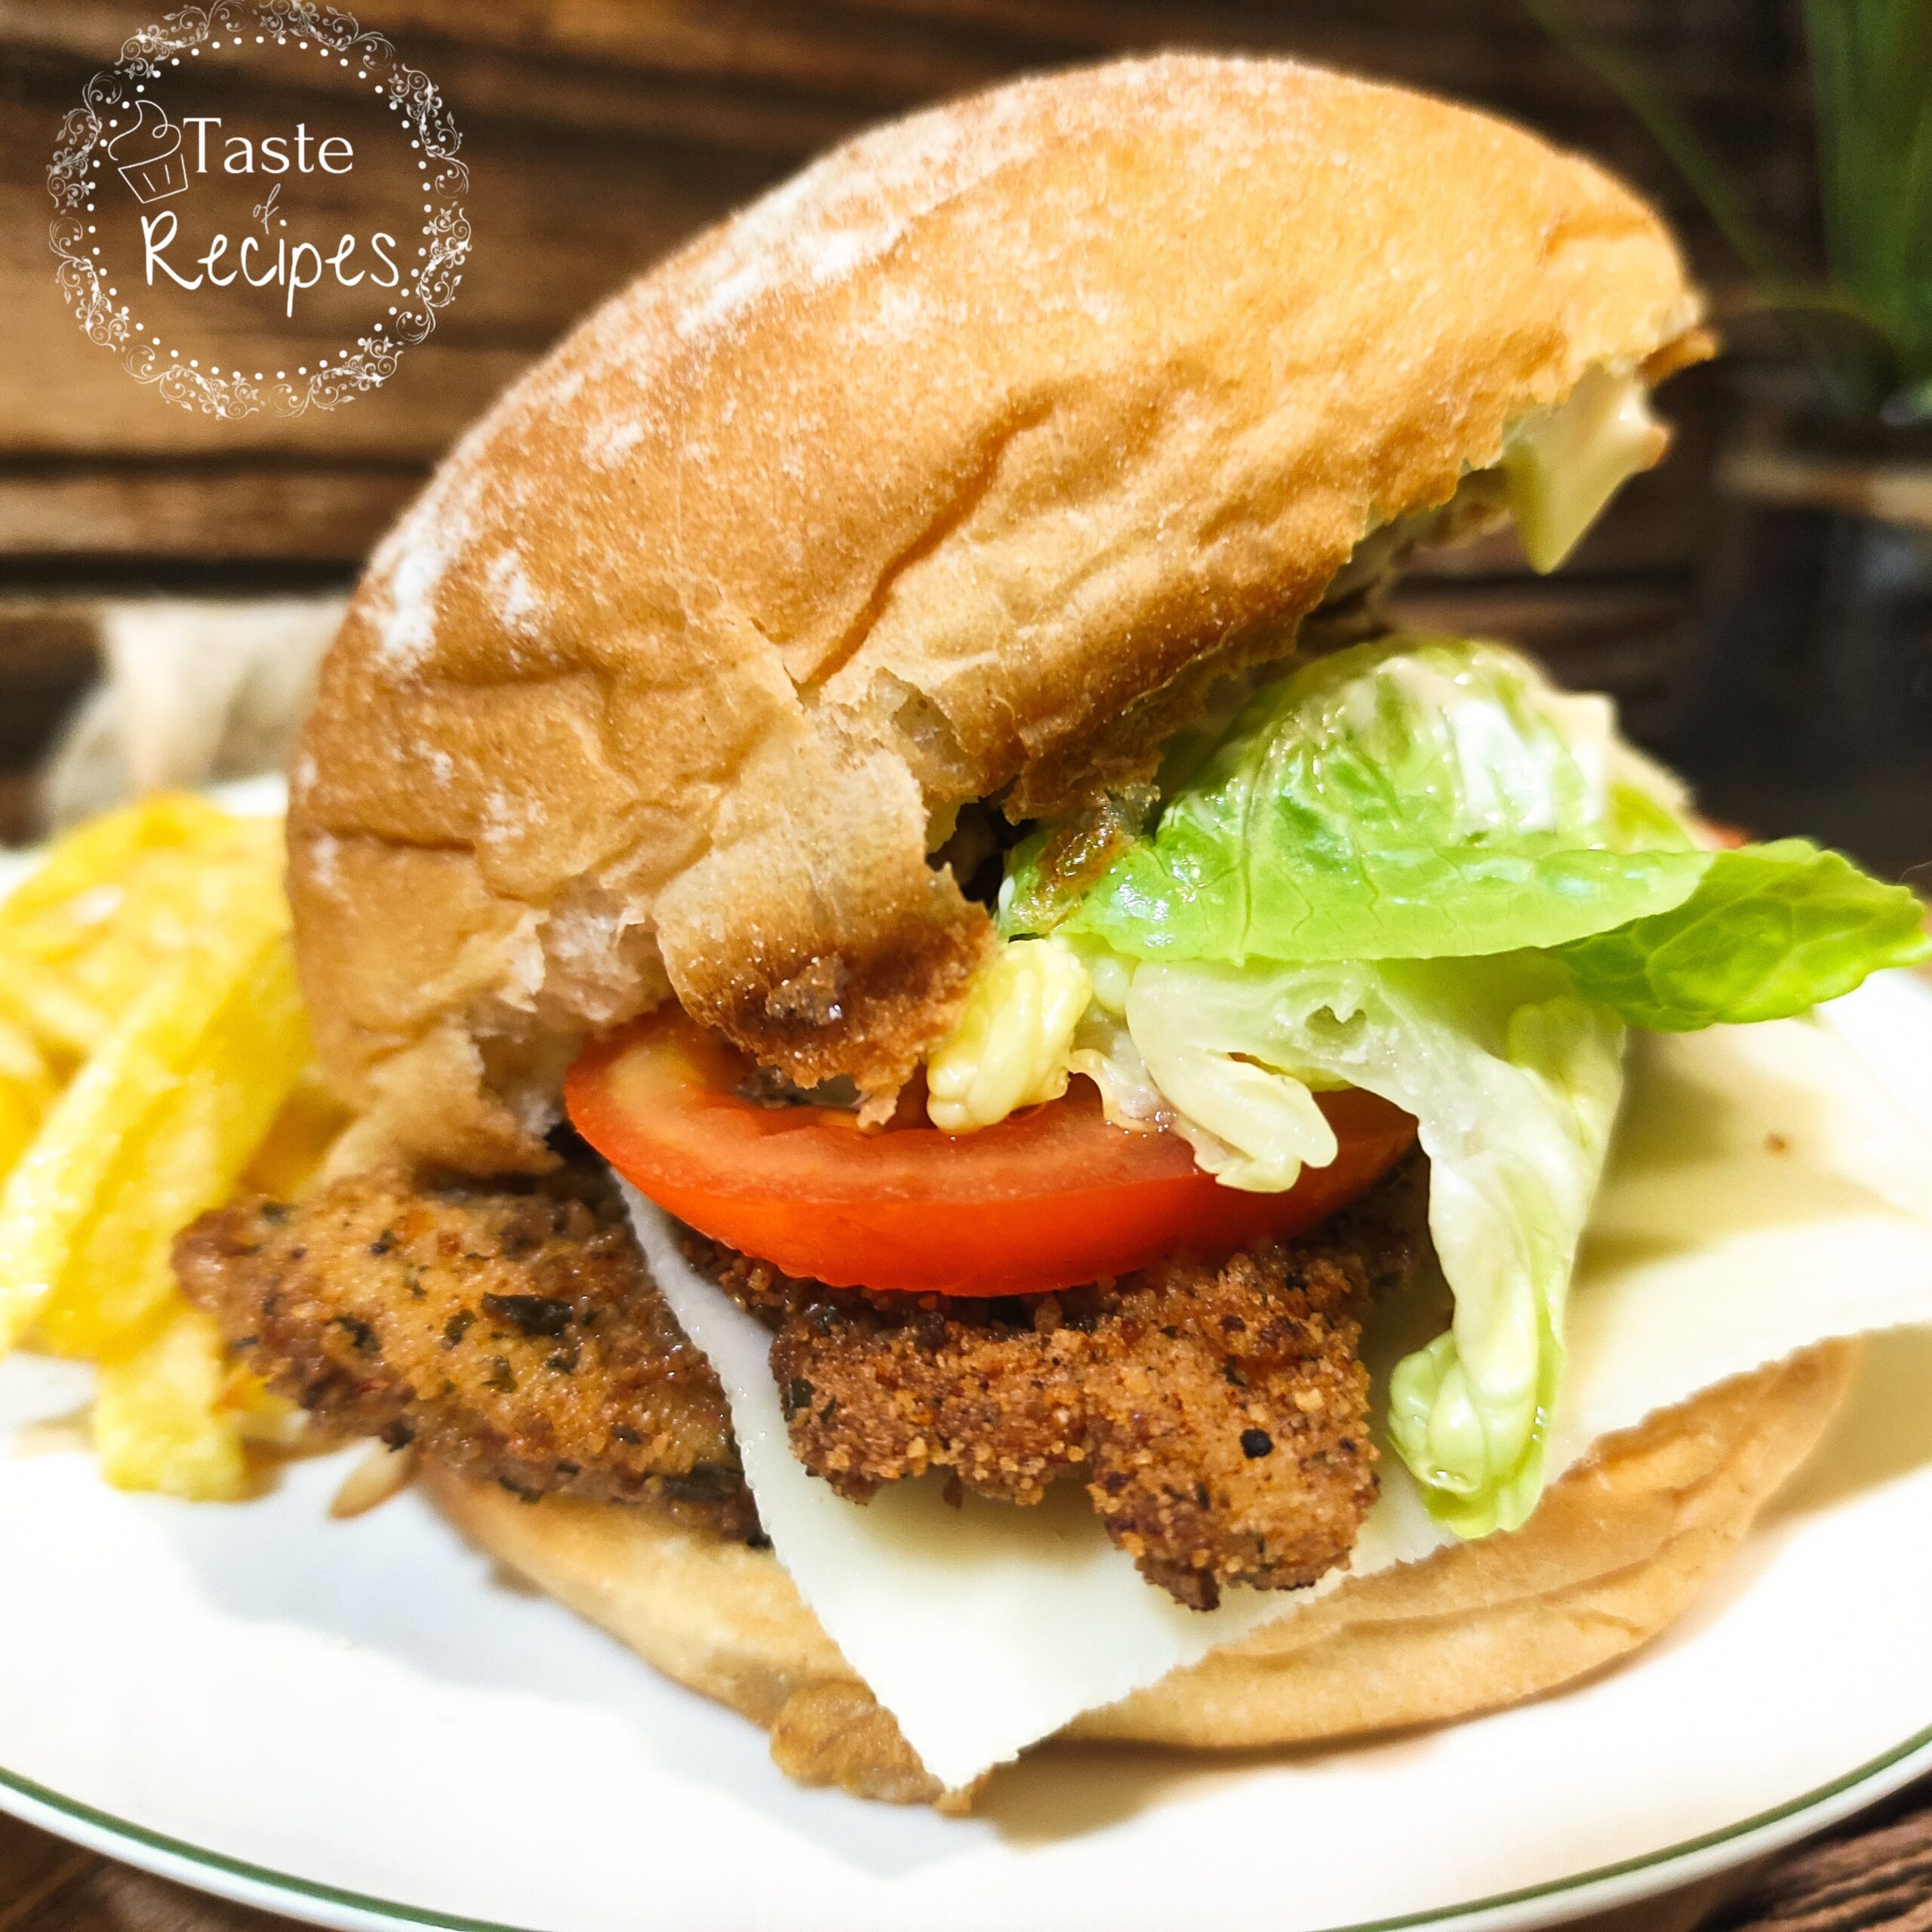 Breaded chicken burger, perfect for a different night out without leaving home.